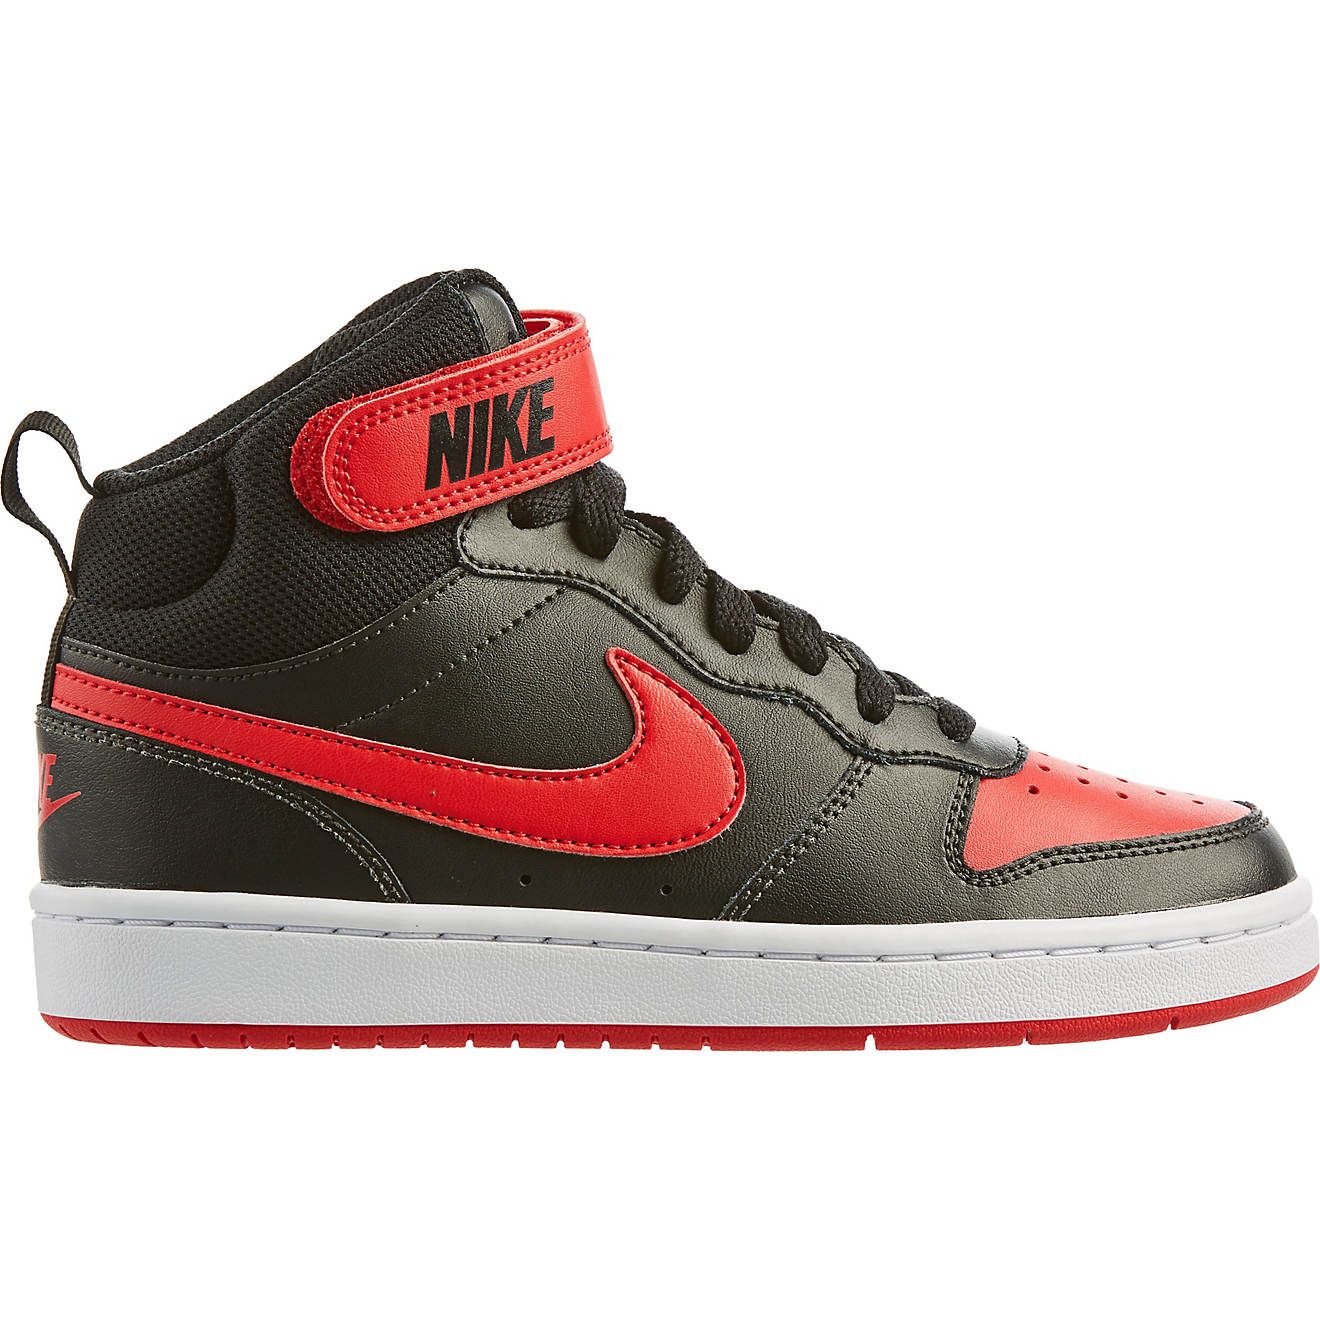 Nike Boys' Court Borough Mid Shoes | Academy Sports + Outdoor Affiliate